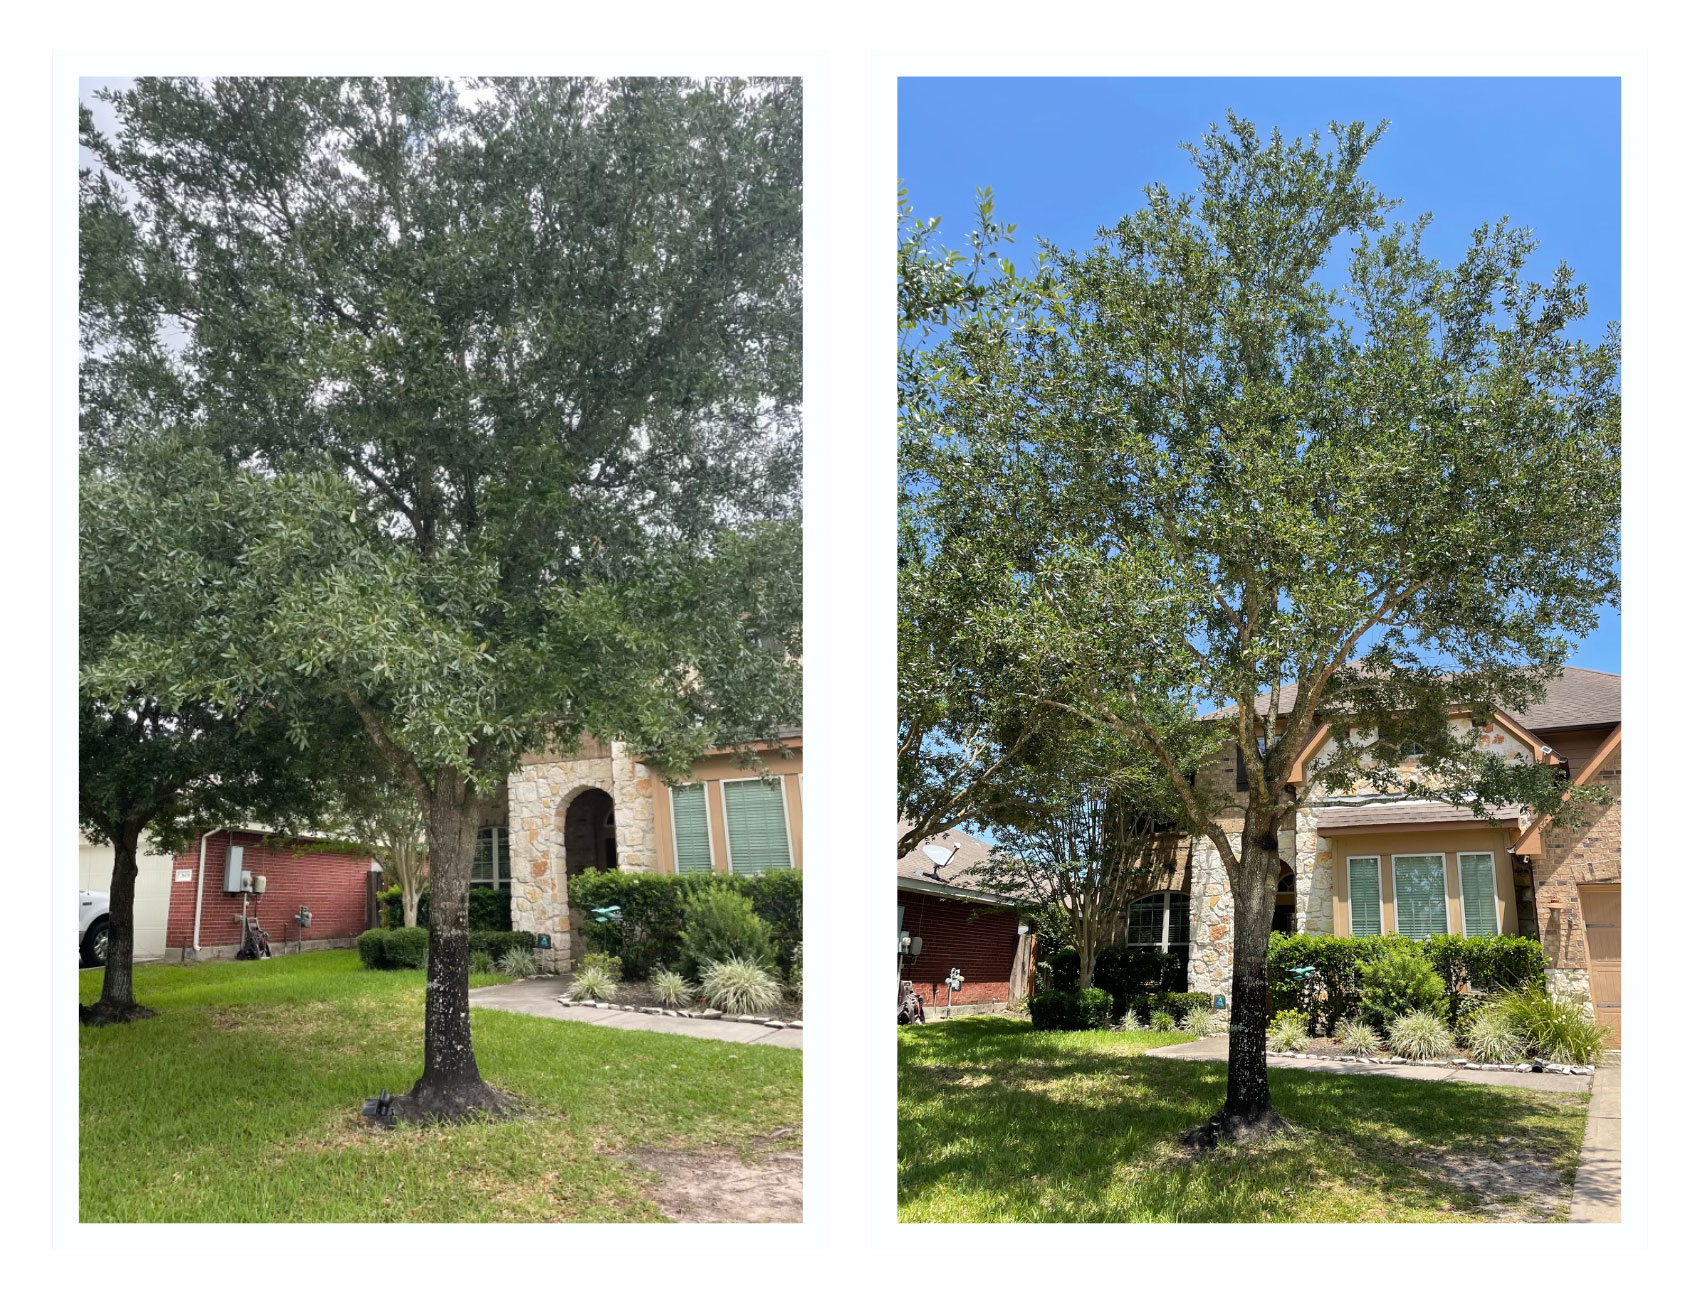 Tree Trimmers of Texas | Before and After Pruning